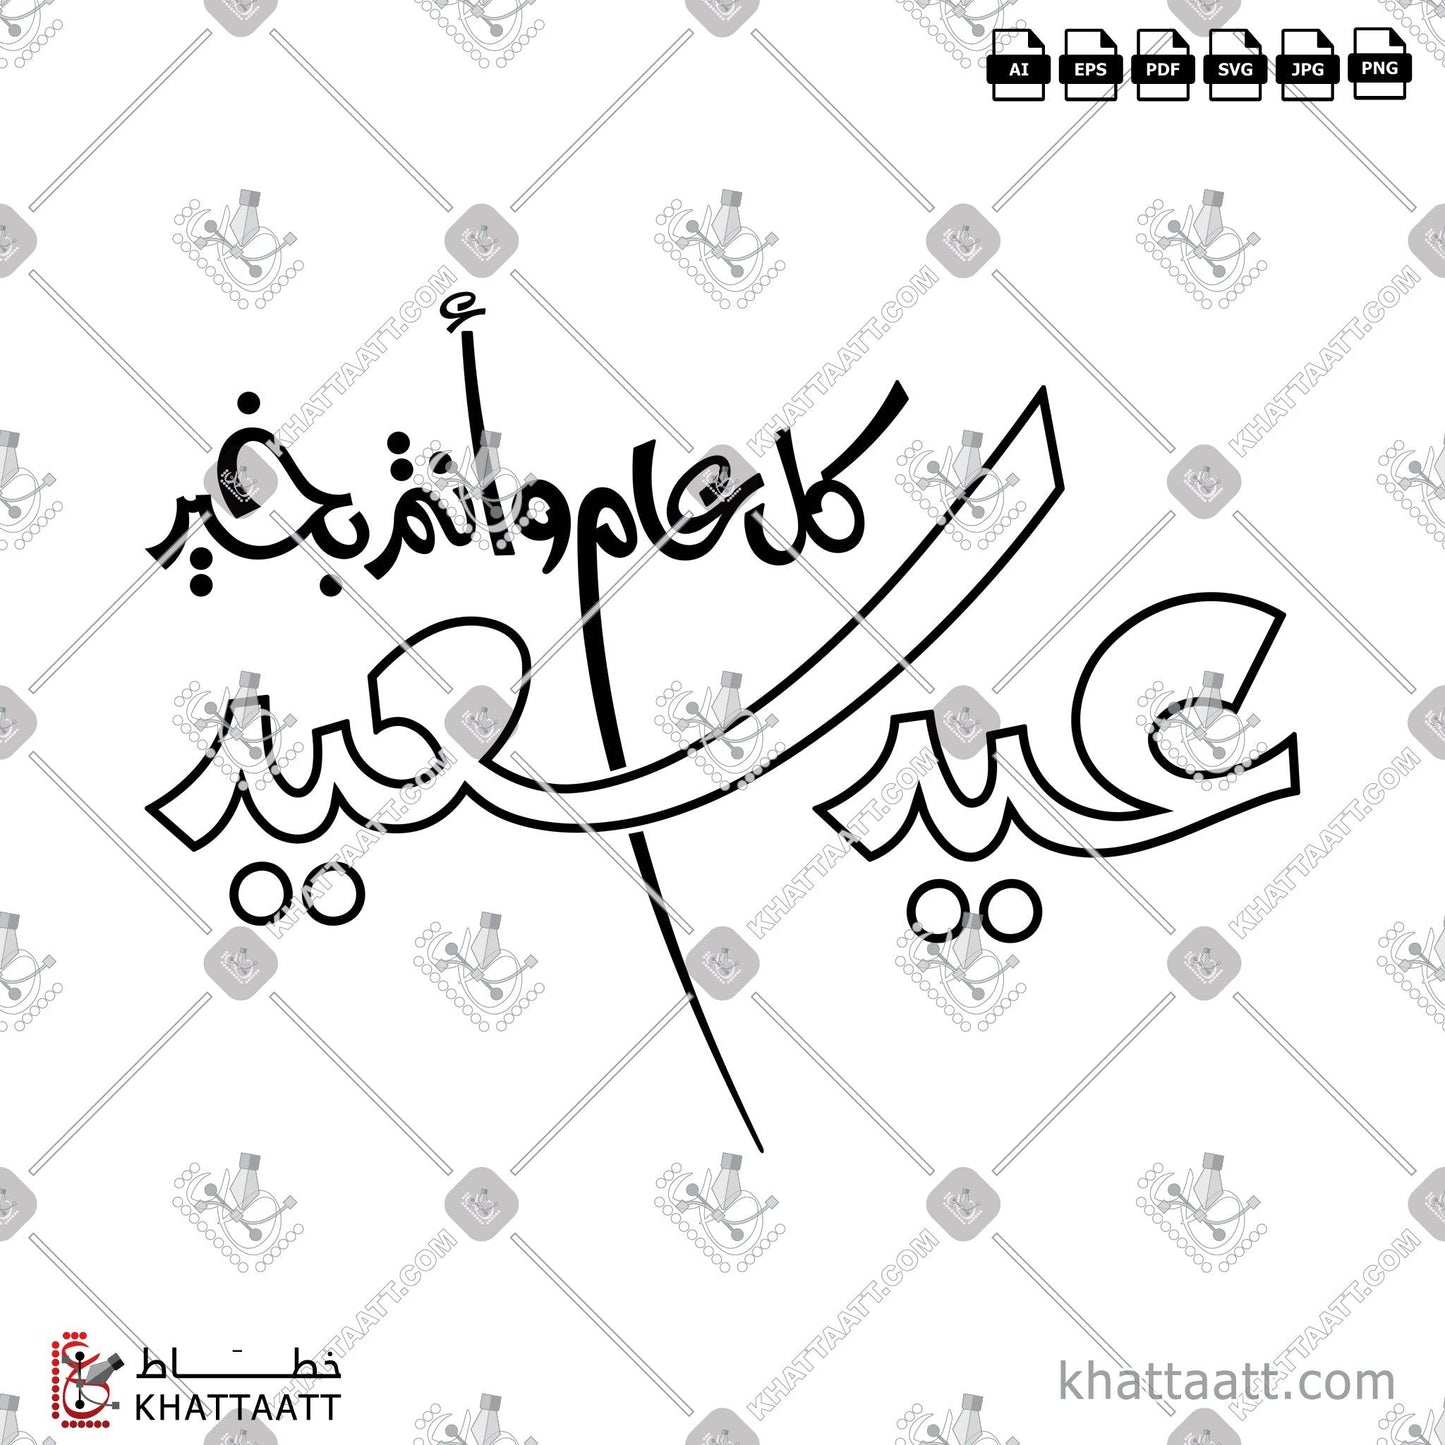 Download Arabic Calligraphy of عيد سعيد - كل عام وأنتم بخير in FreeStyle - الخط الحر in vector and .png